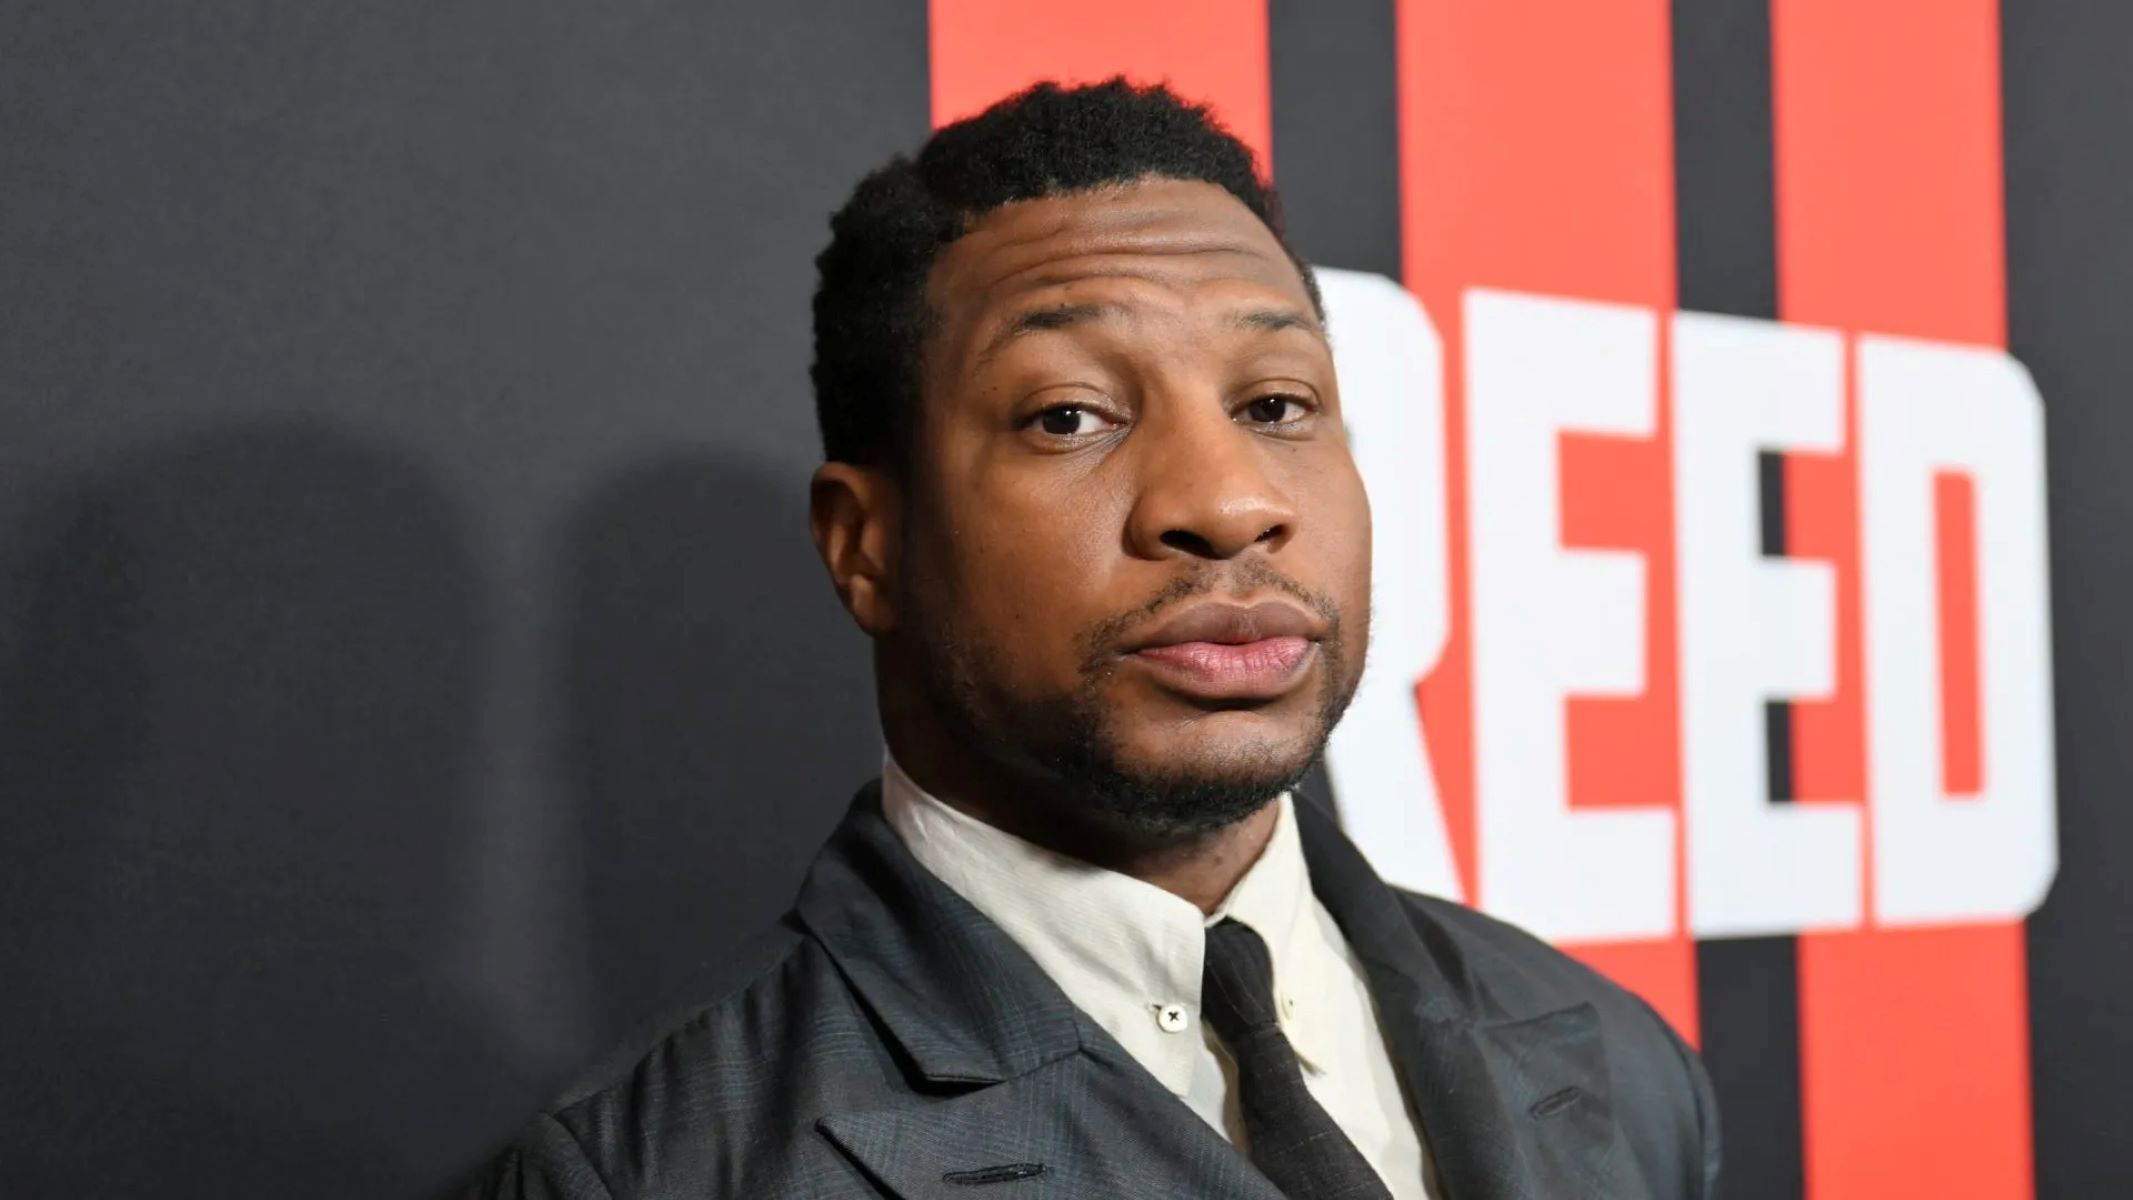 New Angle Of High School Fight Proves Jonathan Majors’ Innocence, Says Lawyer